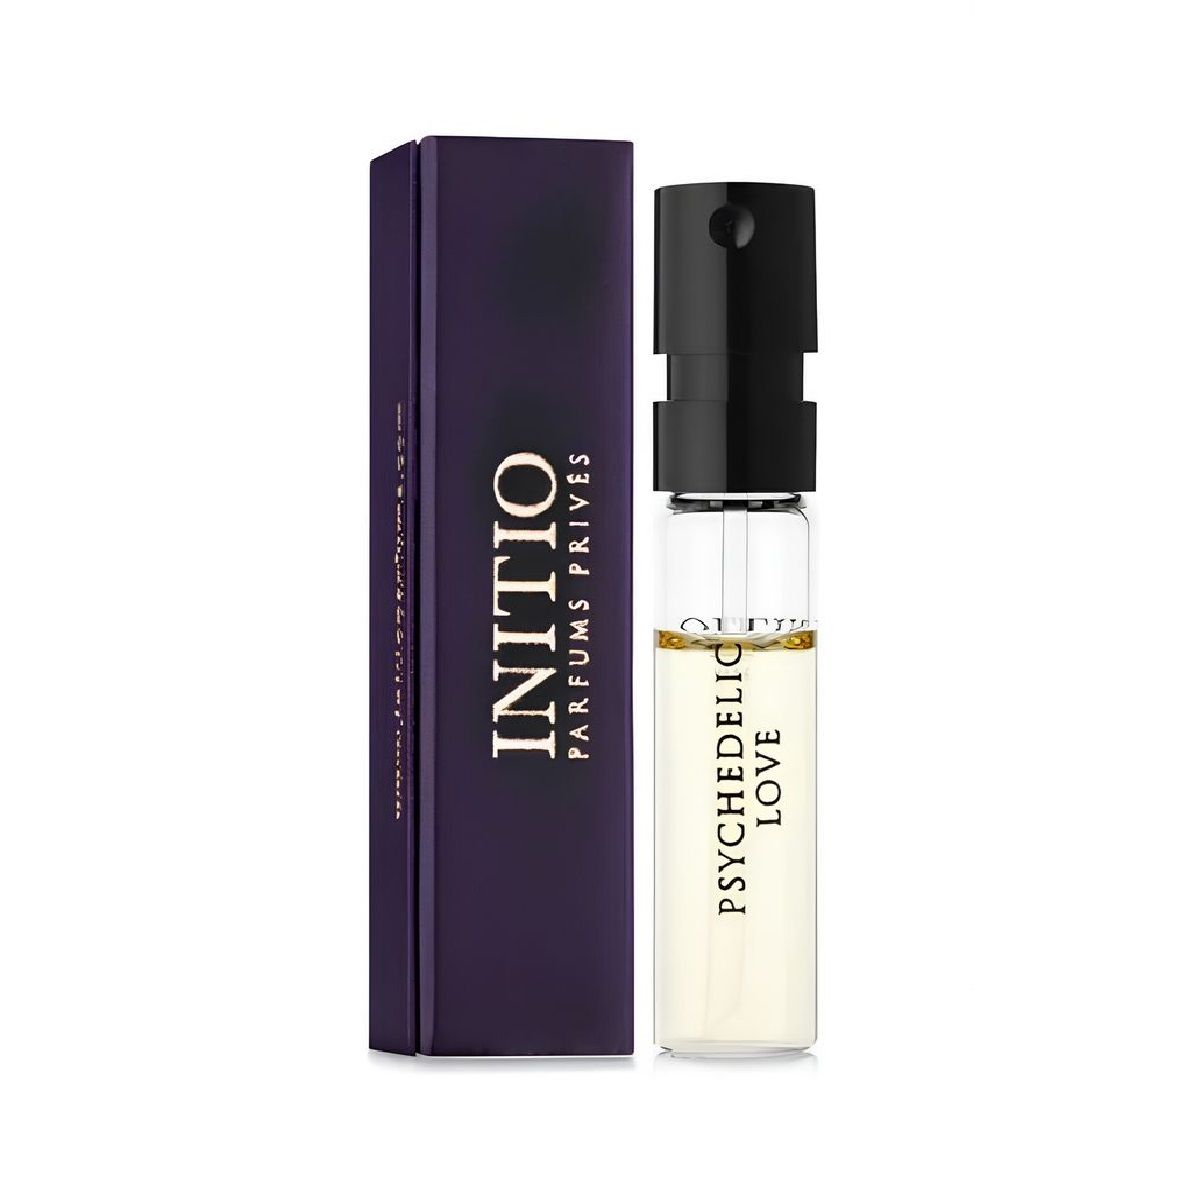 Initio prives psychedelic love. Psychedelic Love Initio Parfums prives. Initio Parfums prives Psychedelic Love EDP 1.5ml пробник. Initio Psychedelic Love пробники. Initio Parfums prives Psychedelic Love u EDP.